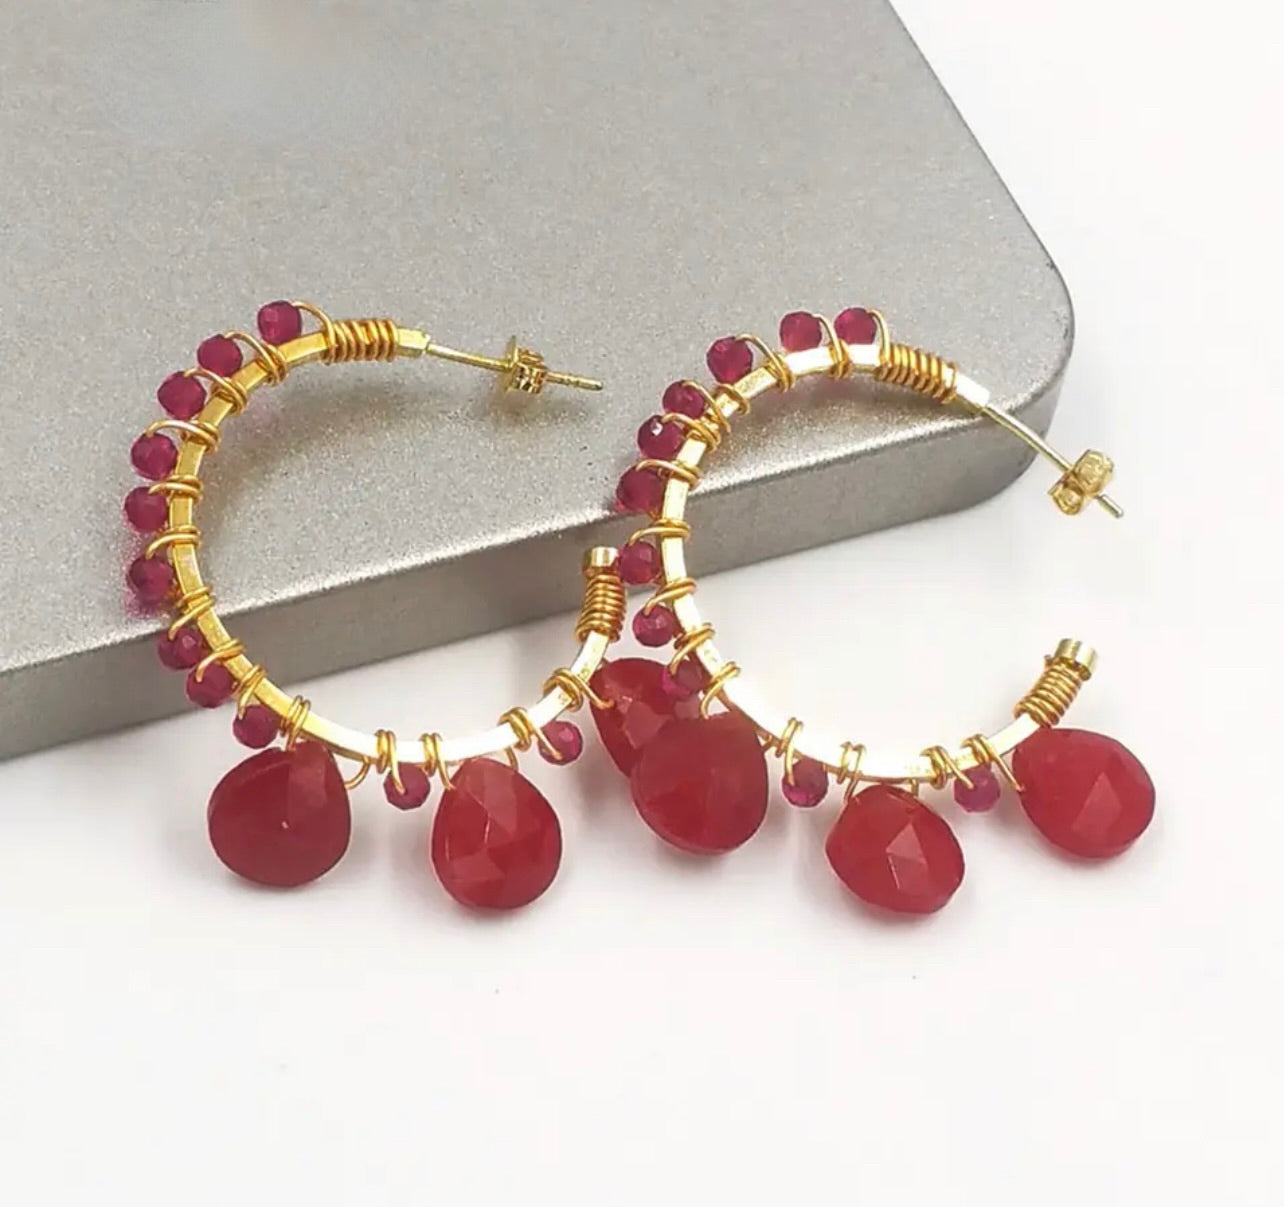 Stainless steel Hoops with Faceted Red Agate and Teardrop Gemstones